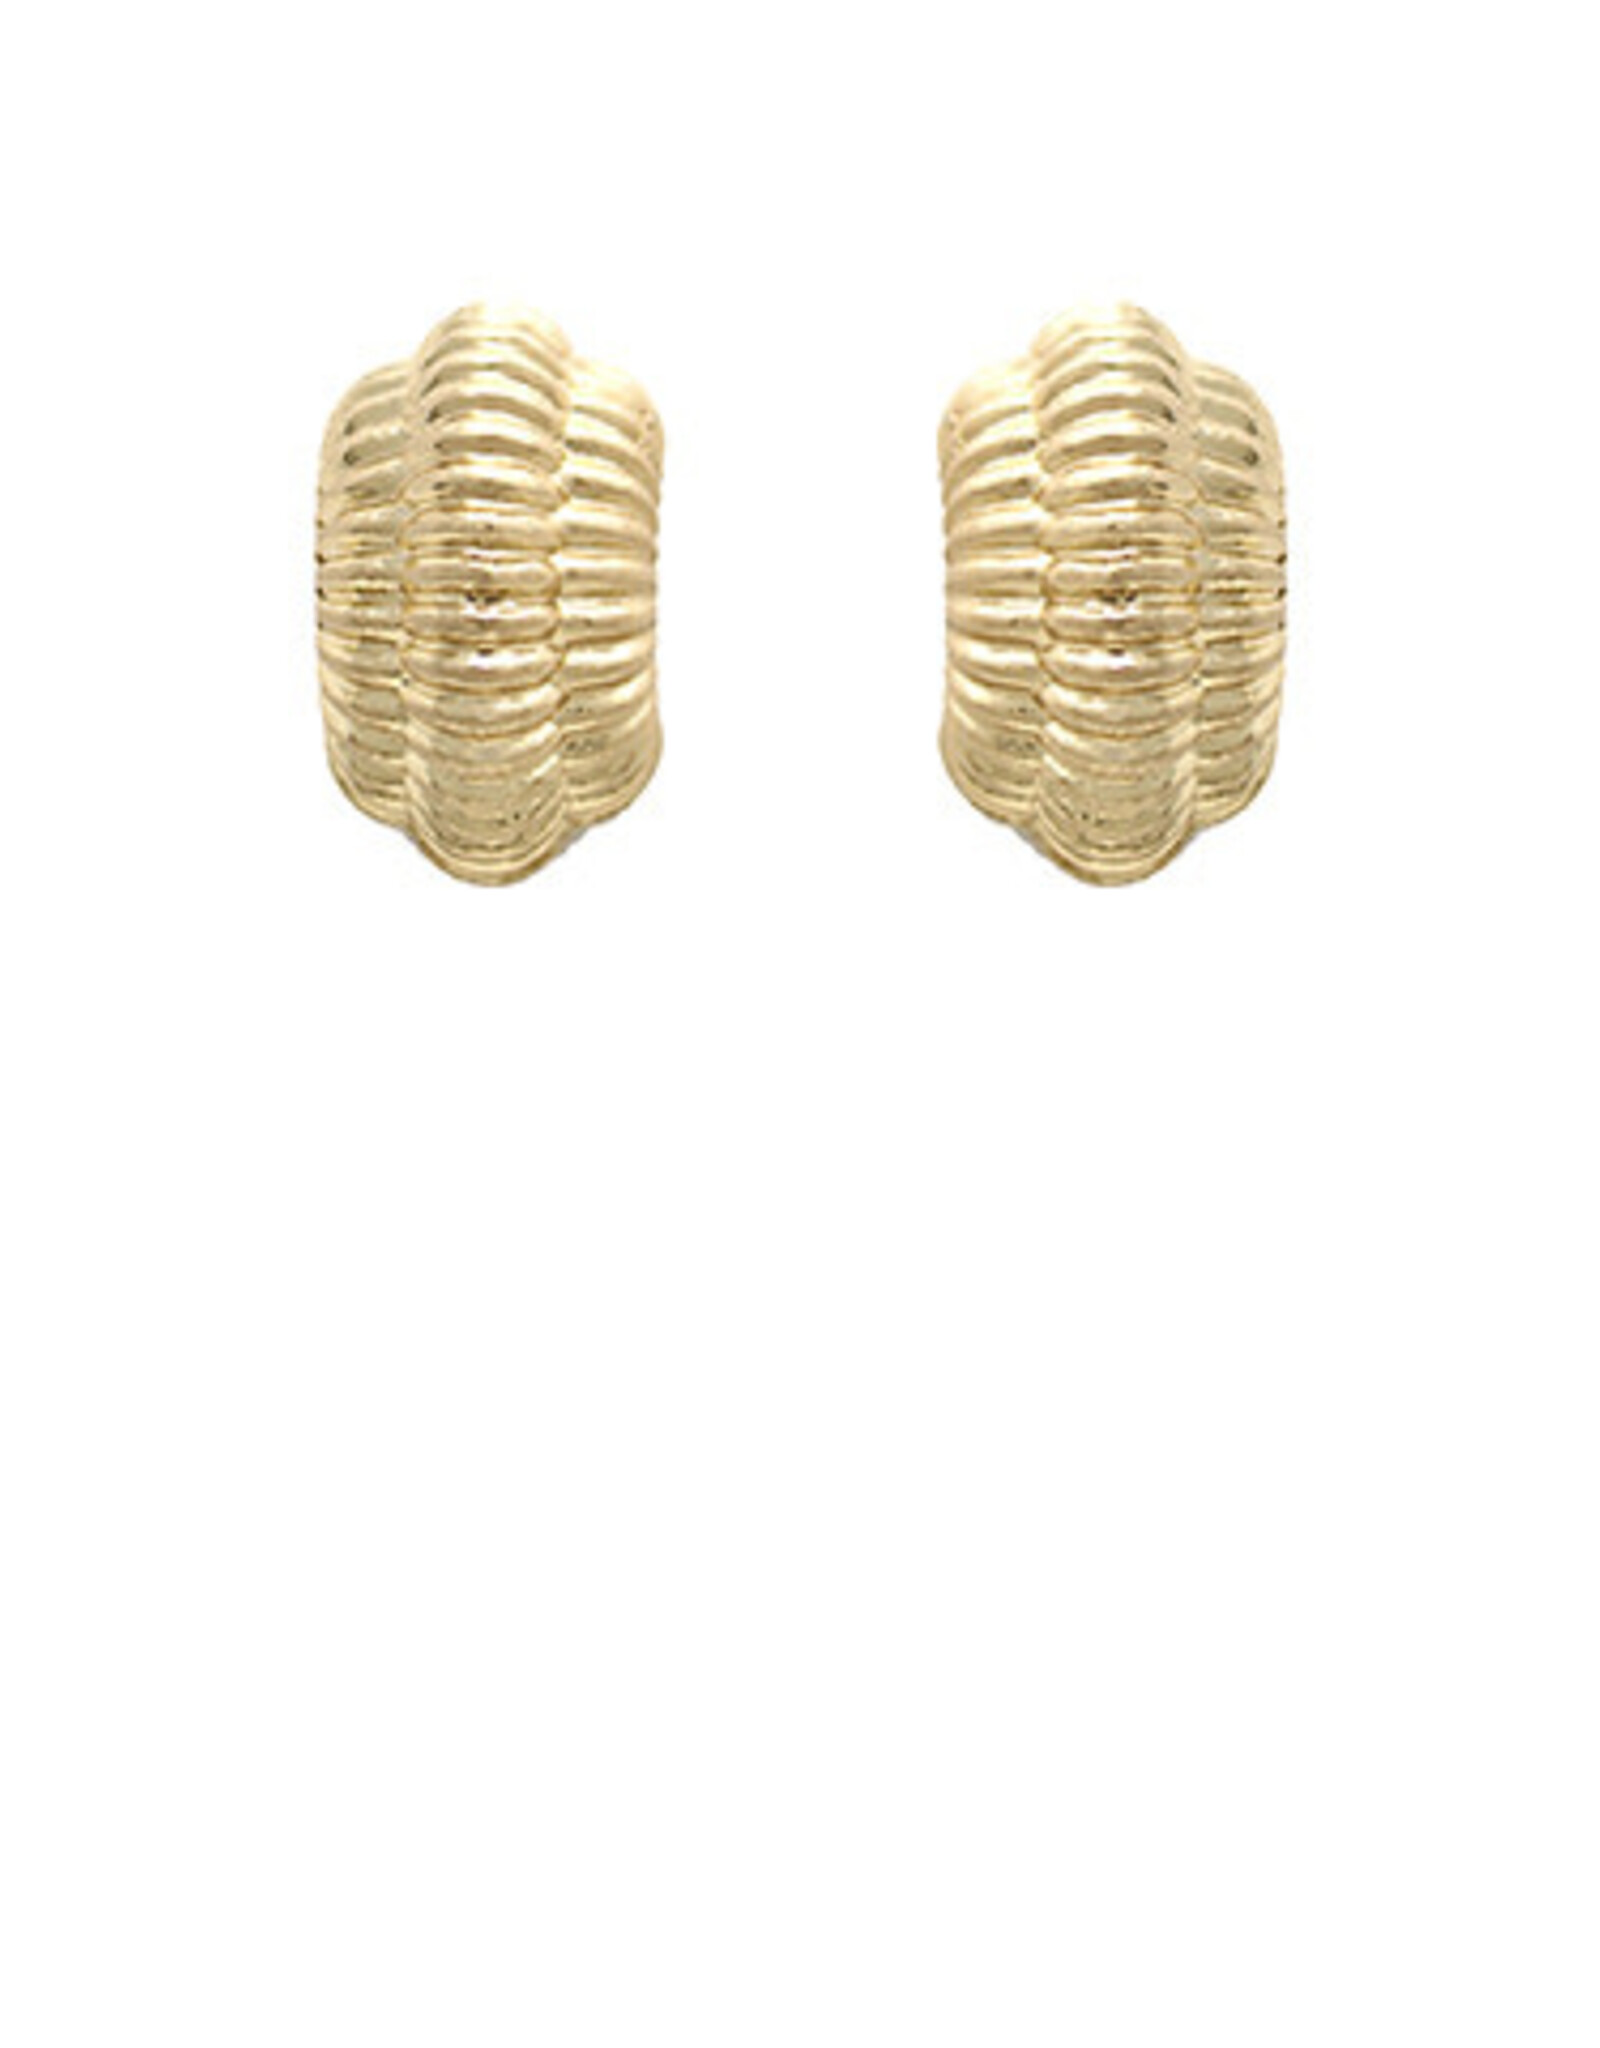 Curved Texture Metal Earring